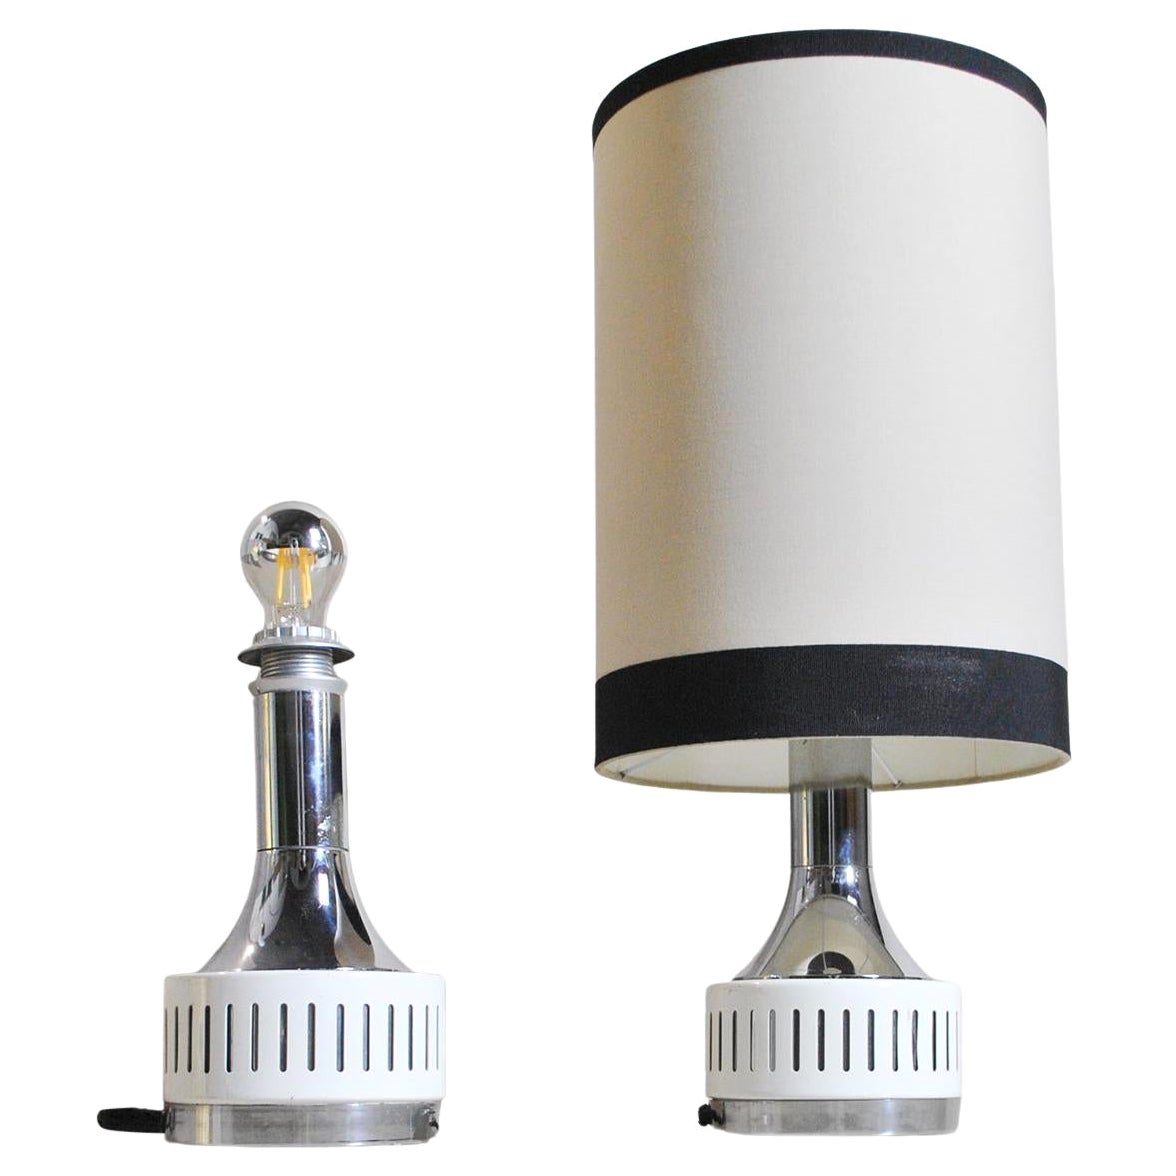 Italian Midcentury Table Lamps from the Sixties For Sale